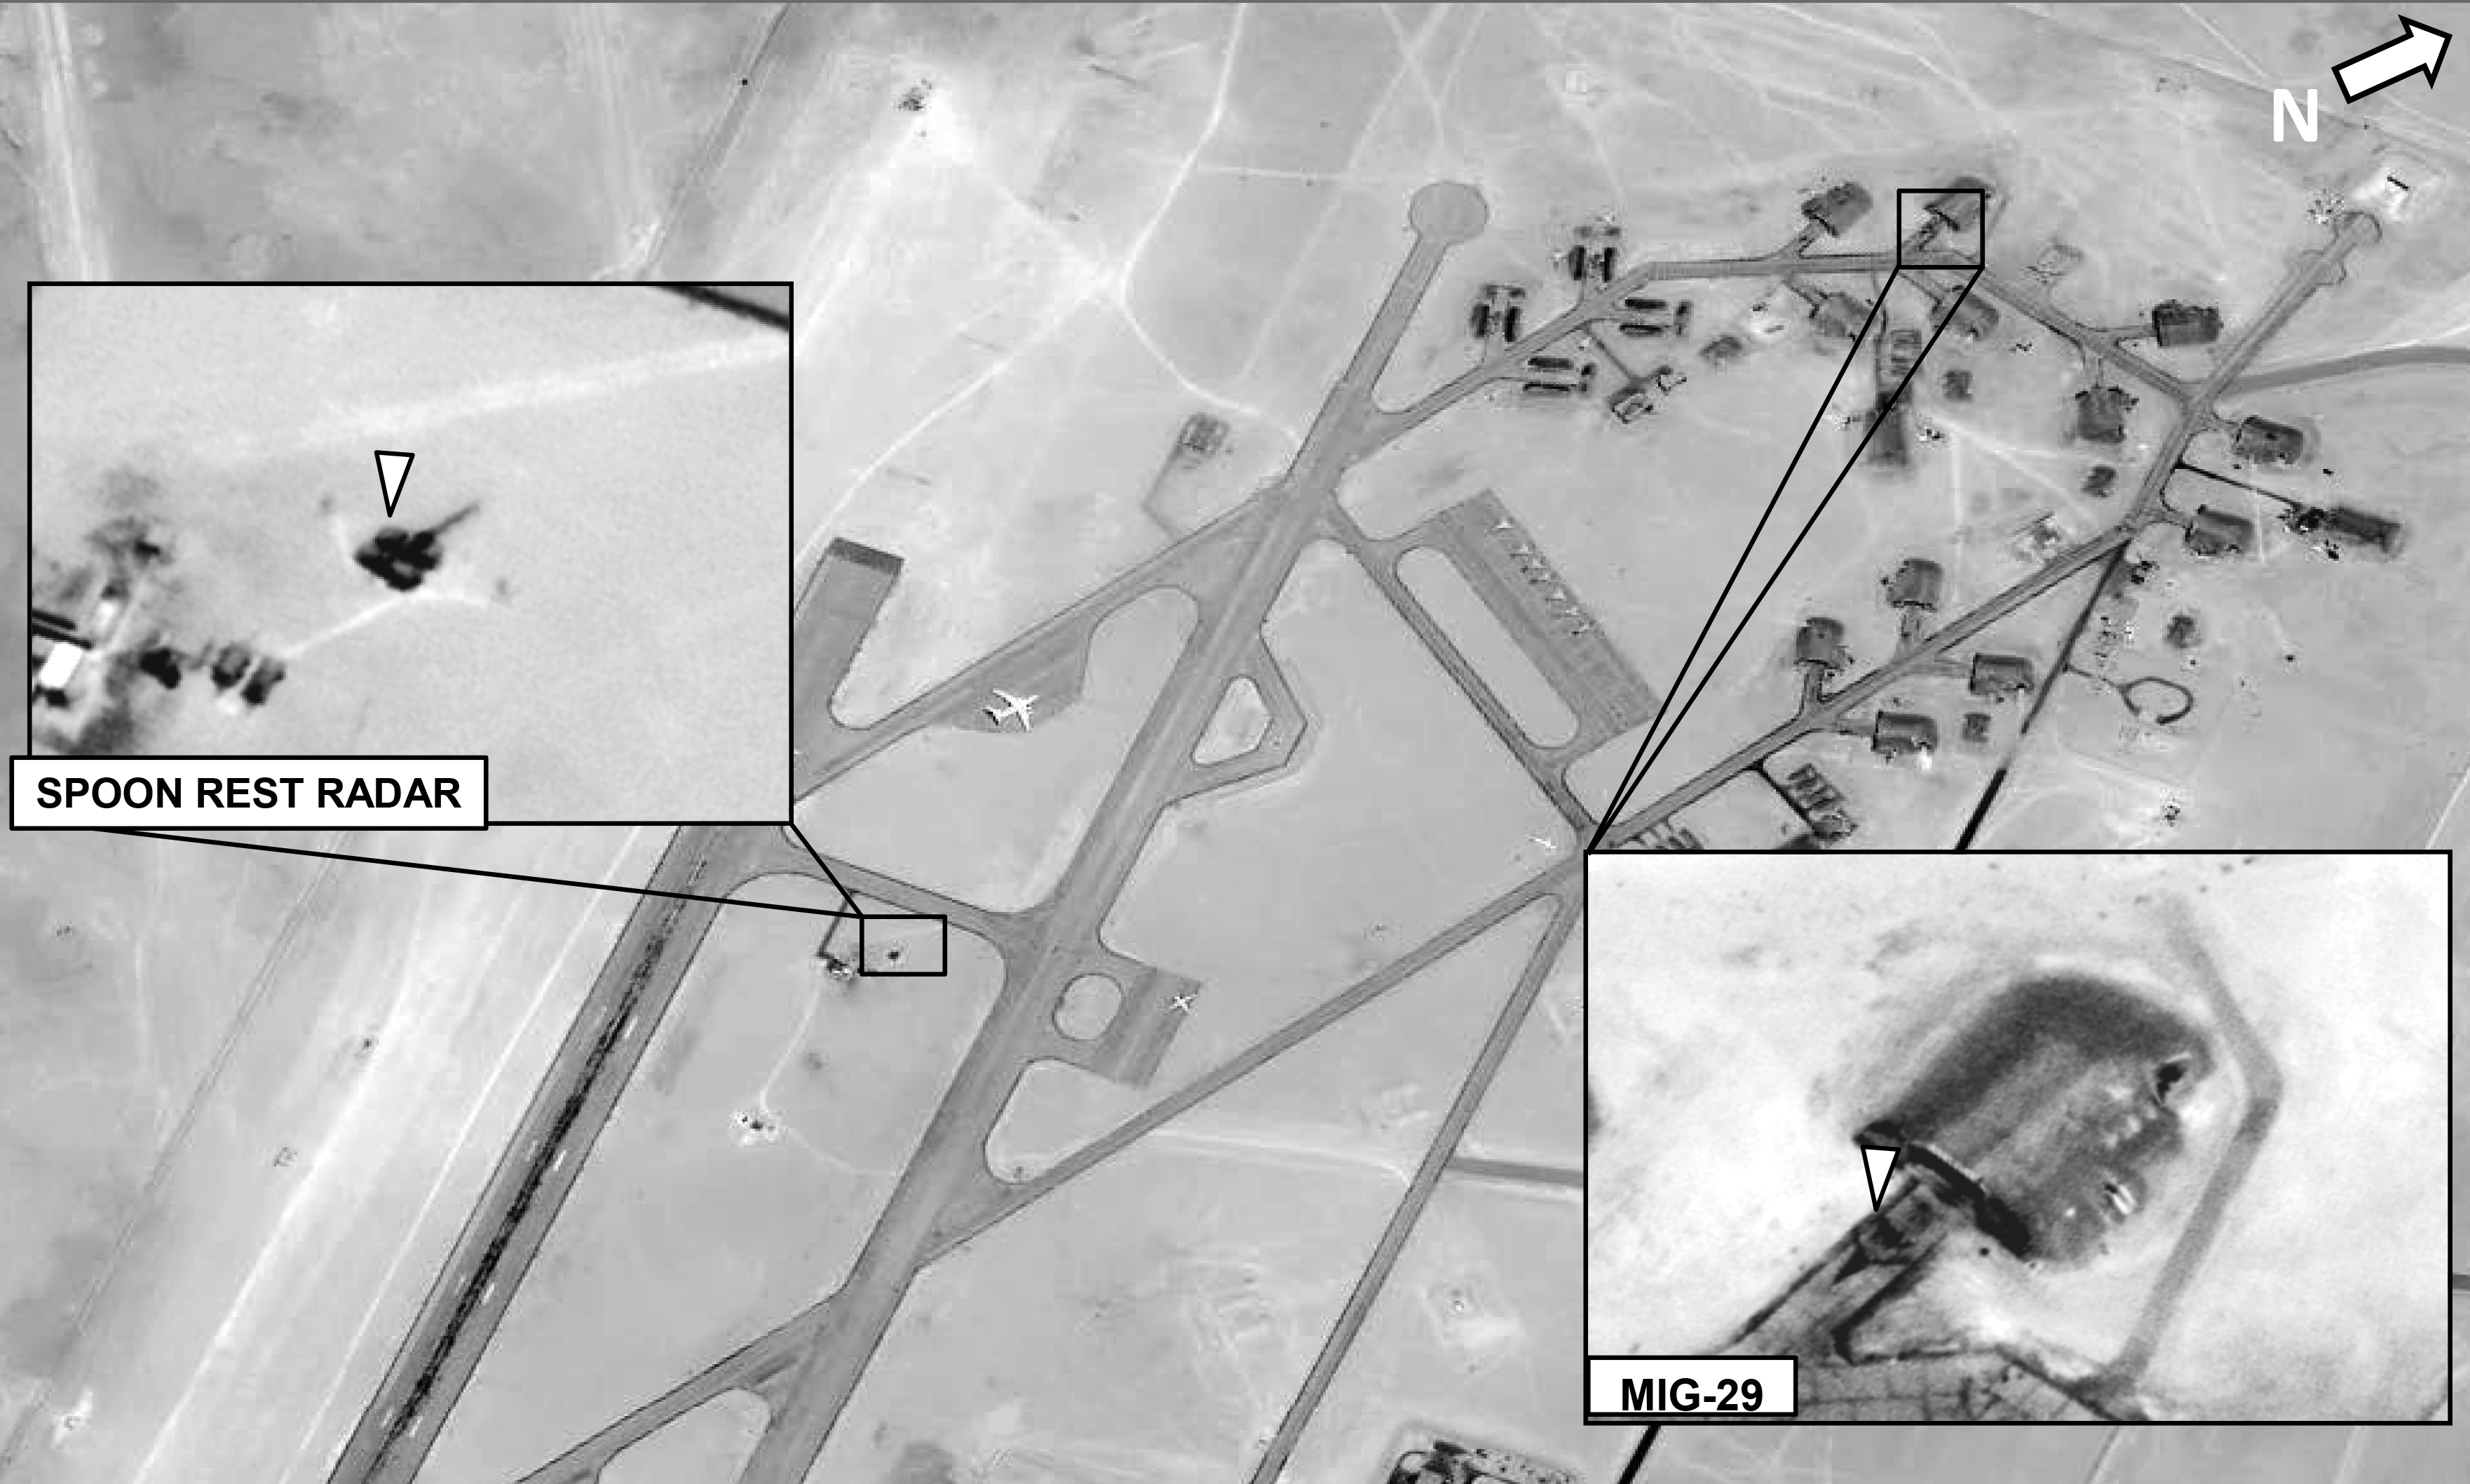 An overhead image released by AFRICOM on 18 June shows a ‘Spoon Rest’ radar and a MiG-29 at Libya’s Al-Jufrah Air Base. (US Africa Command)